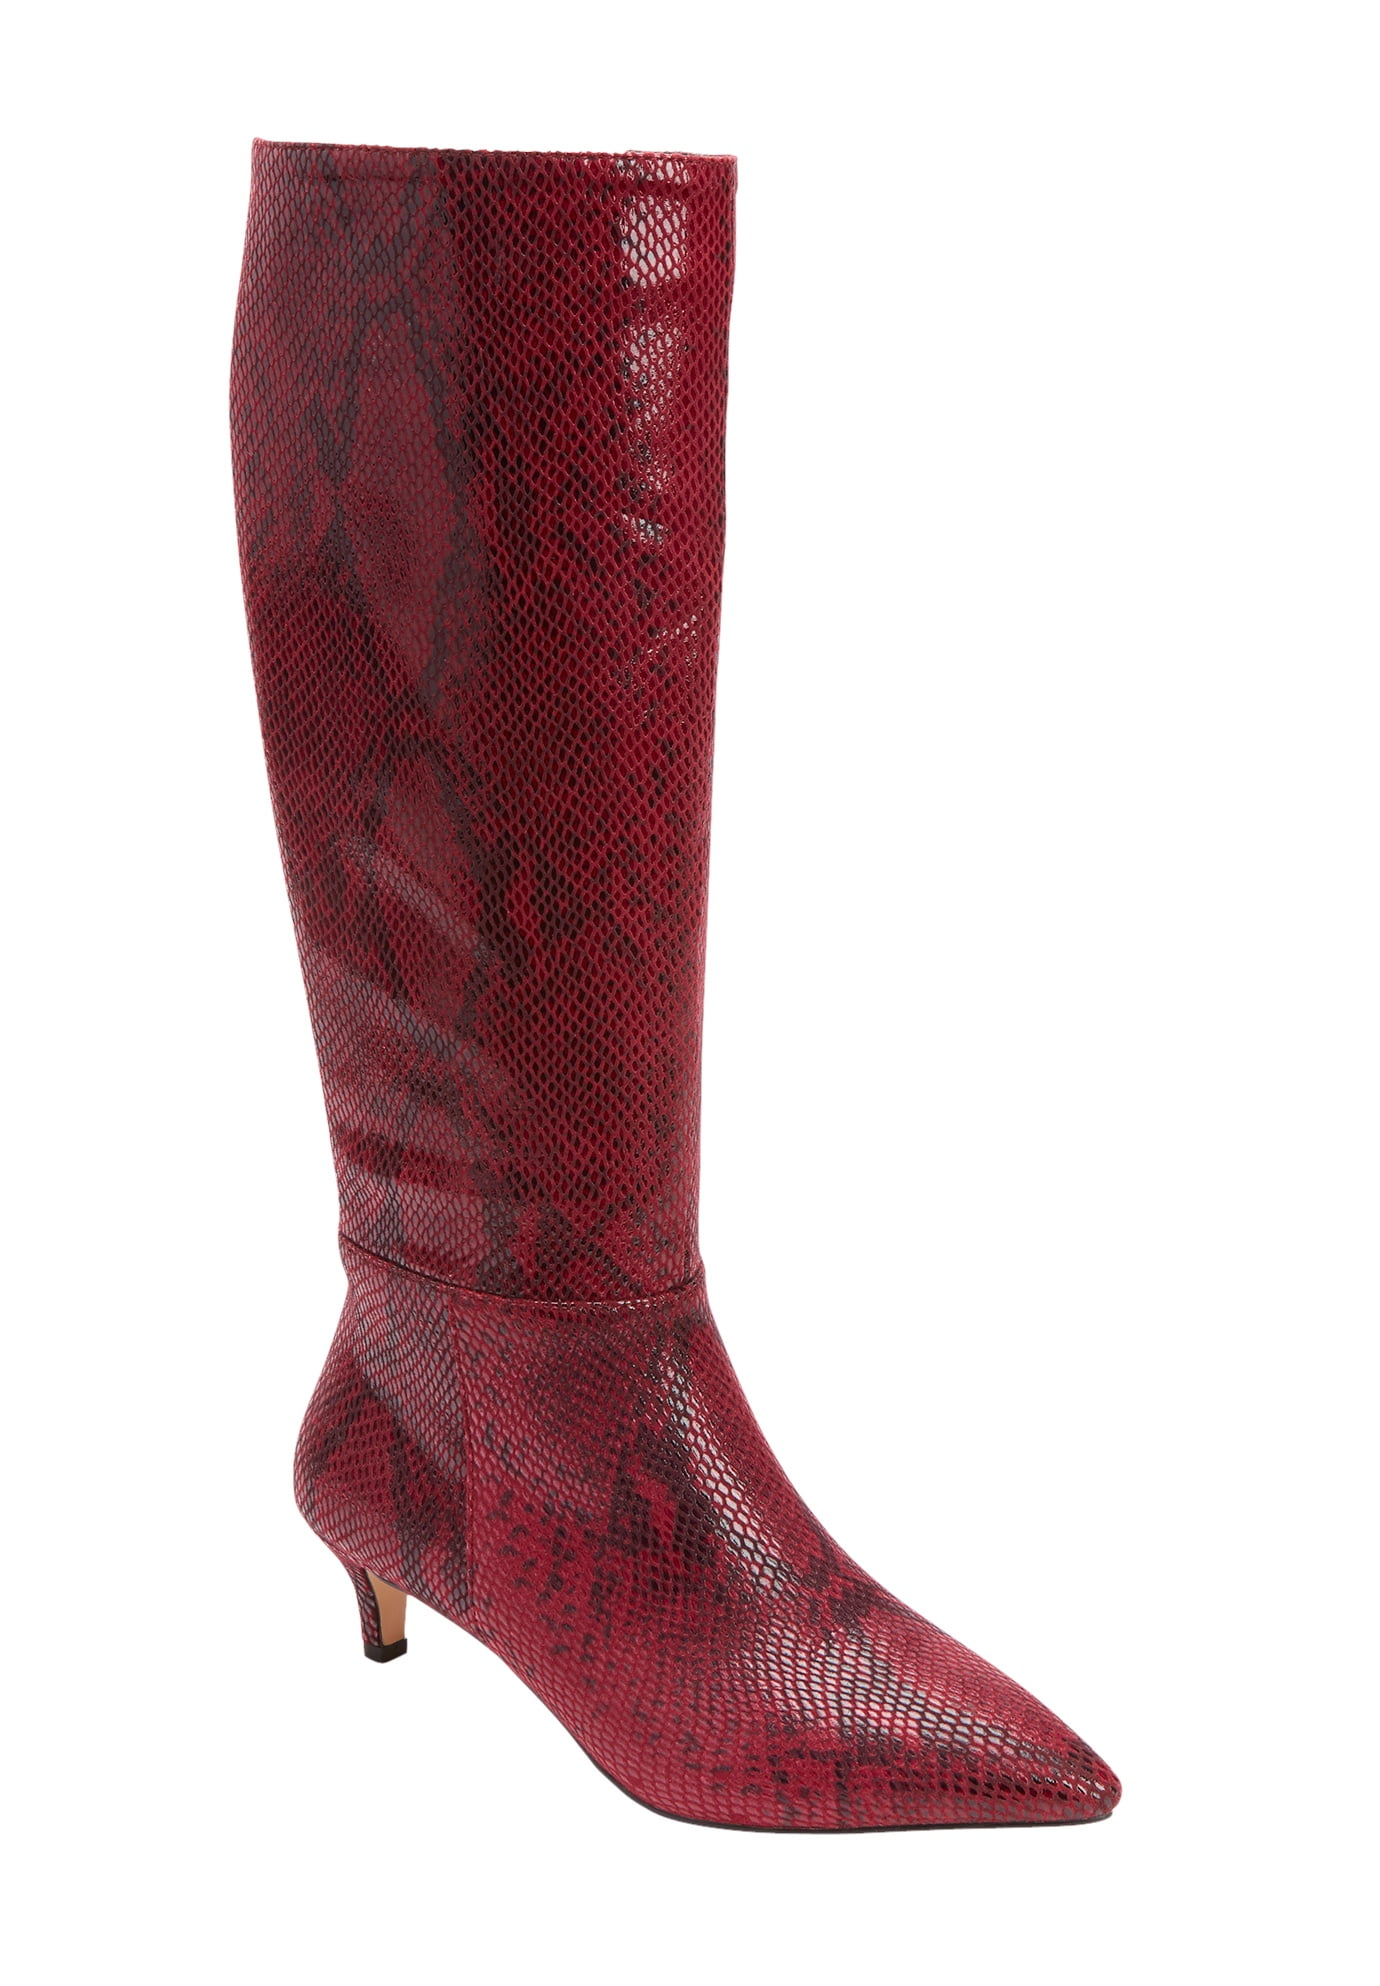 womens wide width red boots